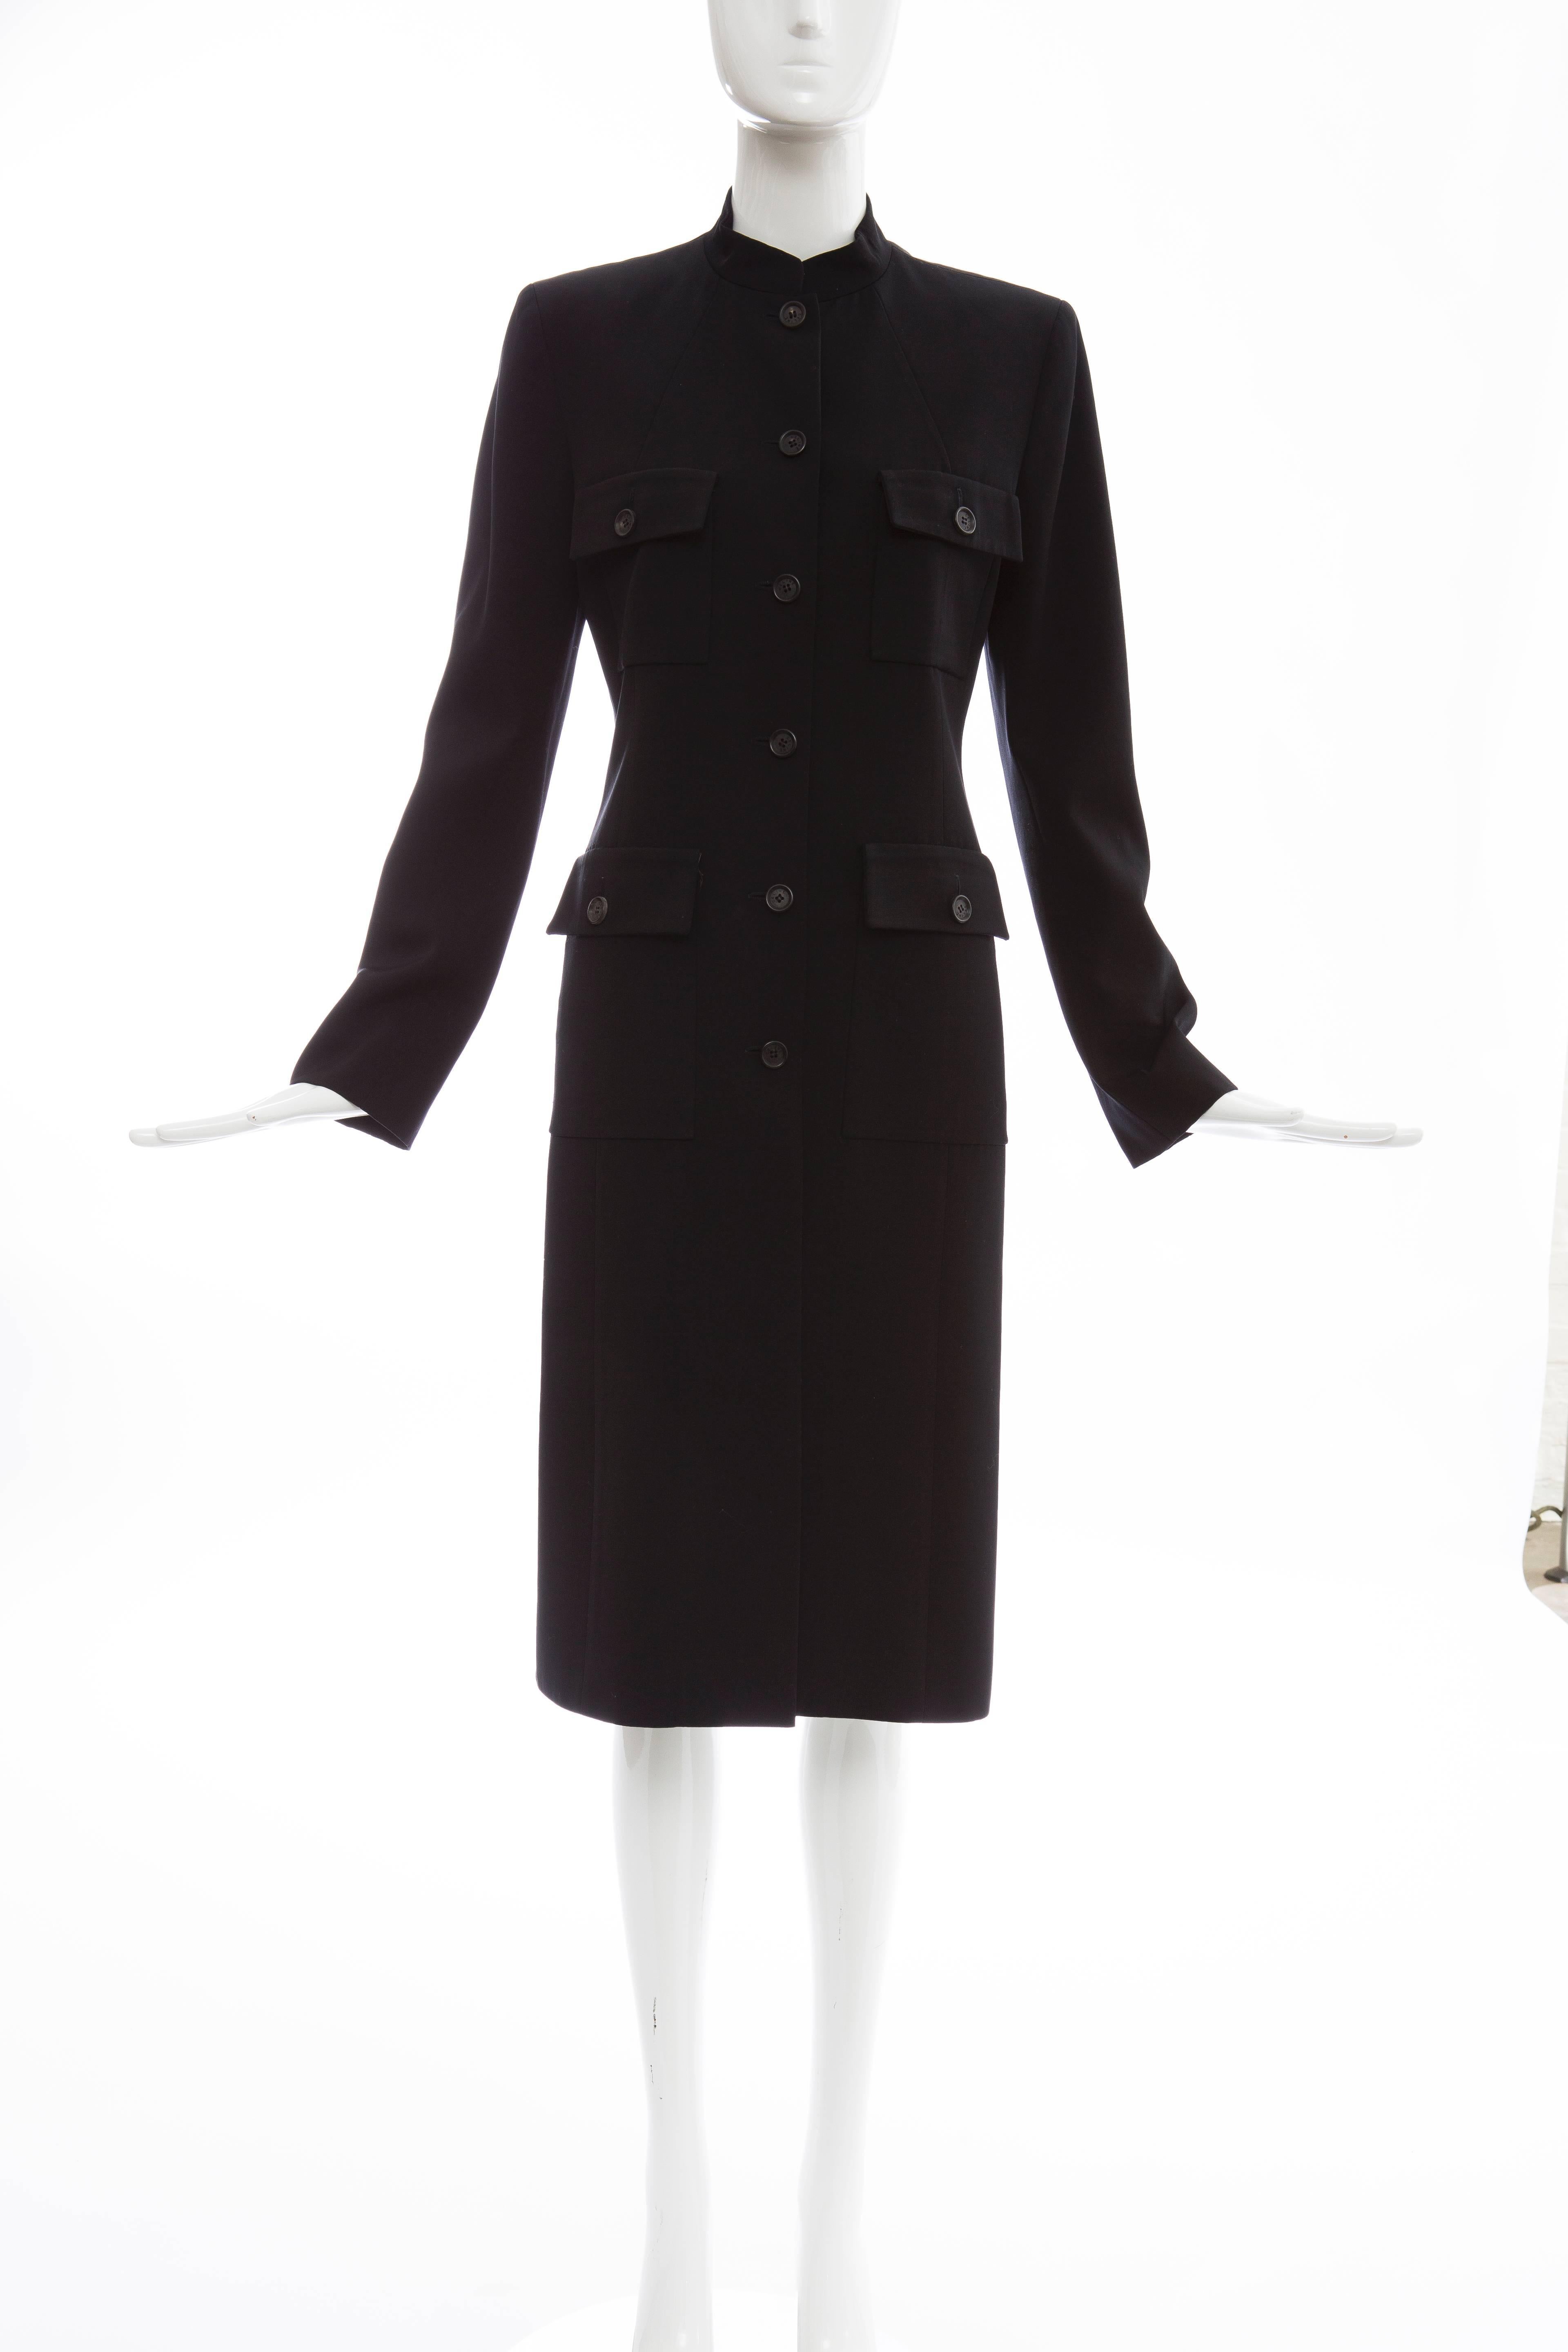 Celine black lightweight wool gabardine button front coat, four button front pockets and fully lined.

EU. 38
US. 6